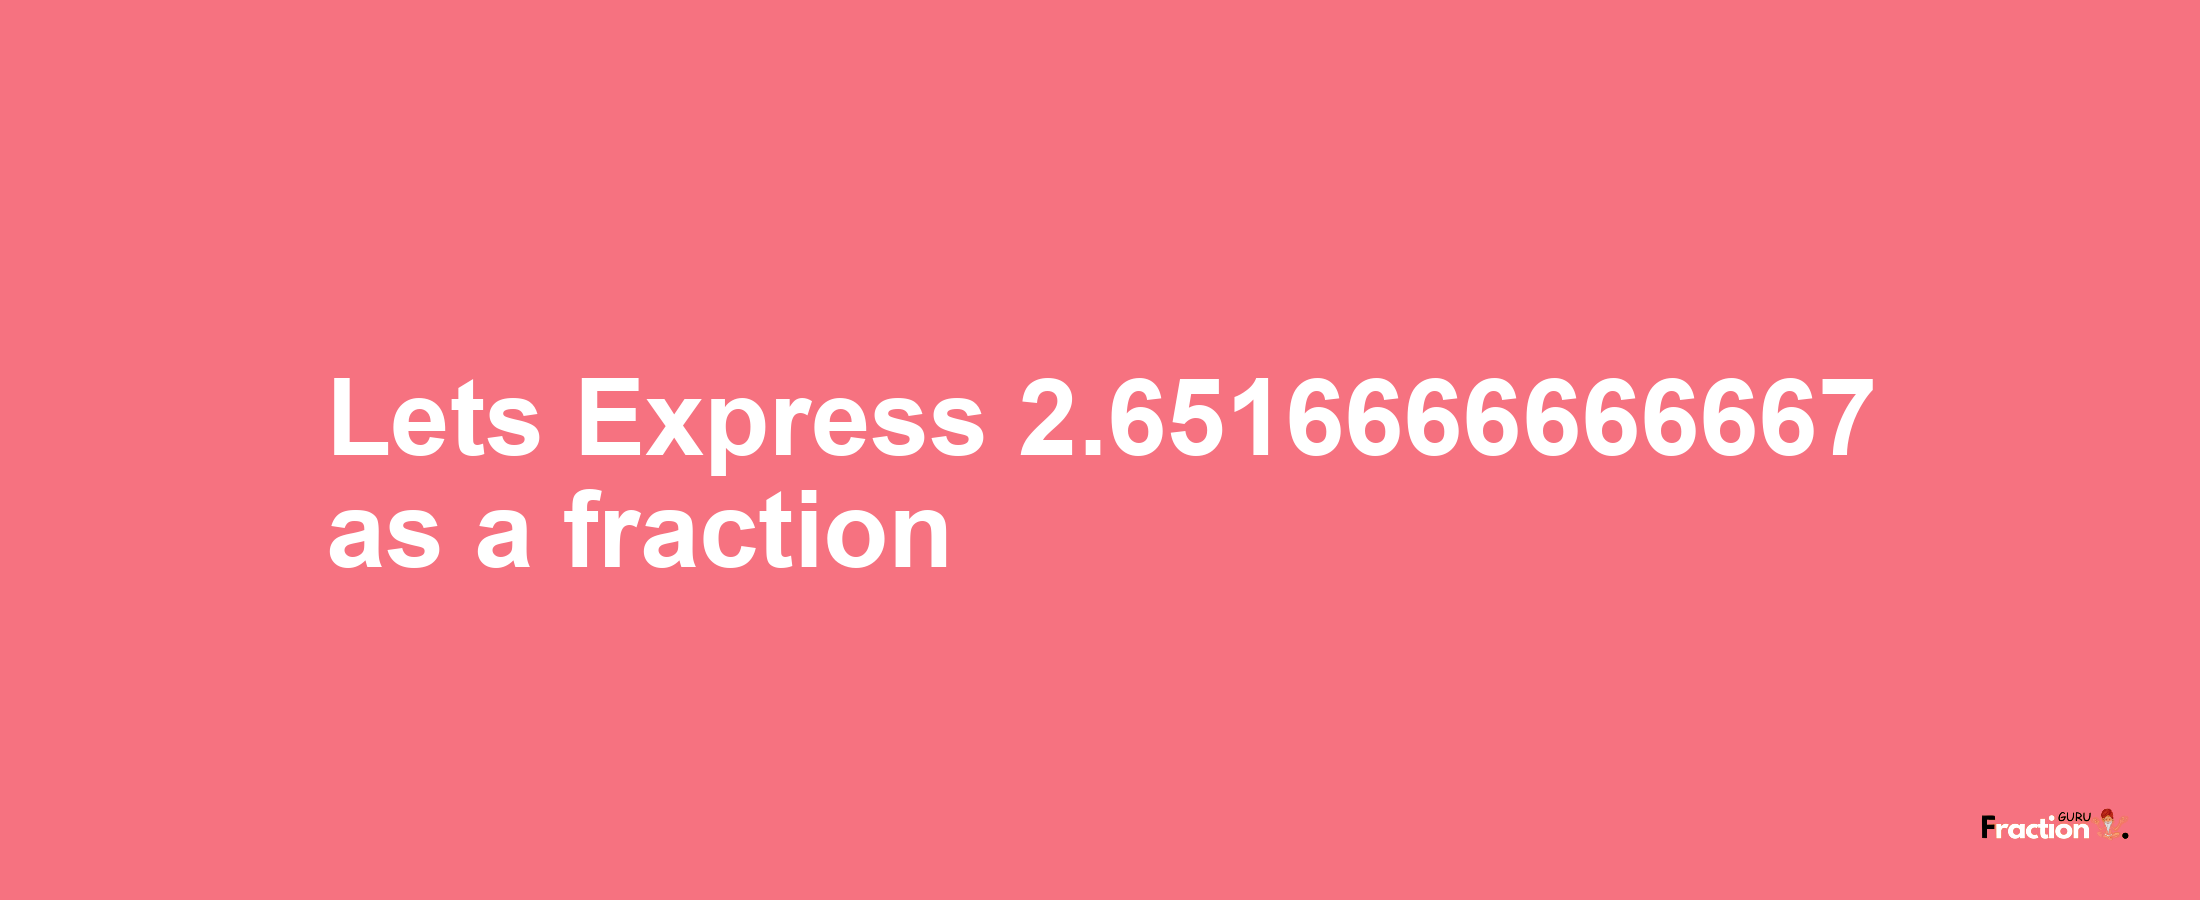 Lets Express 2.6516666666667 as afraction